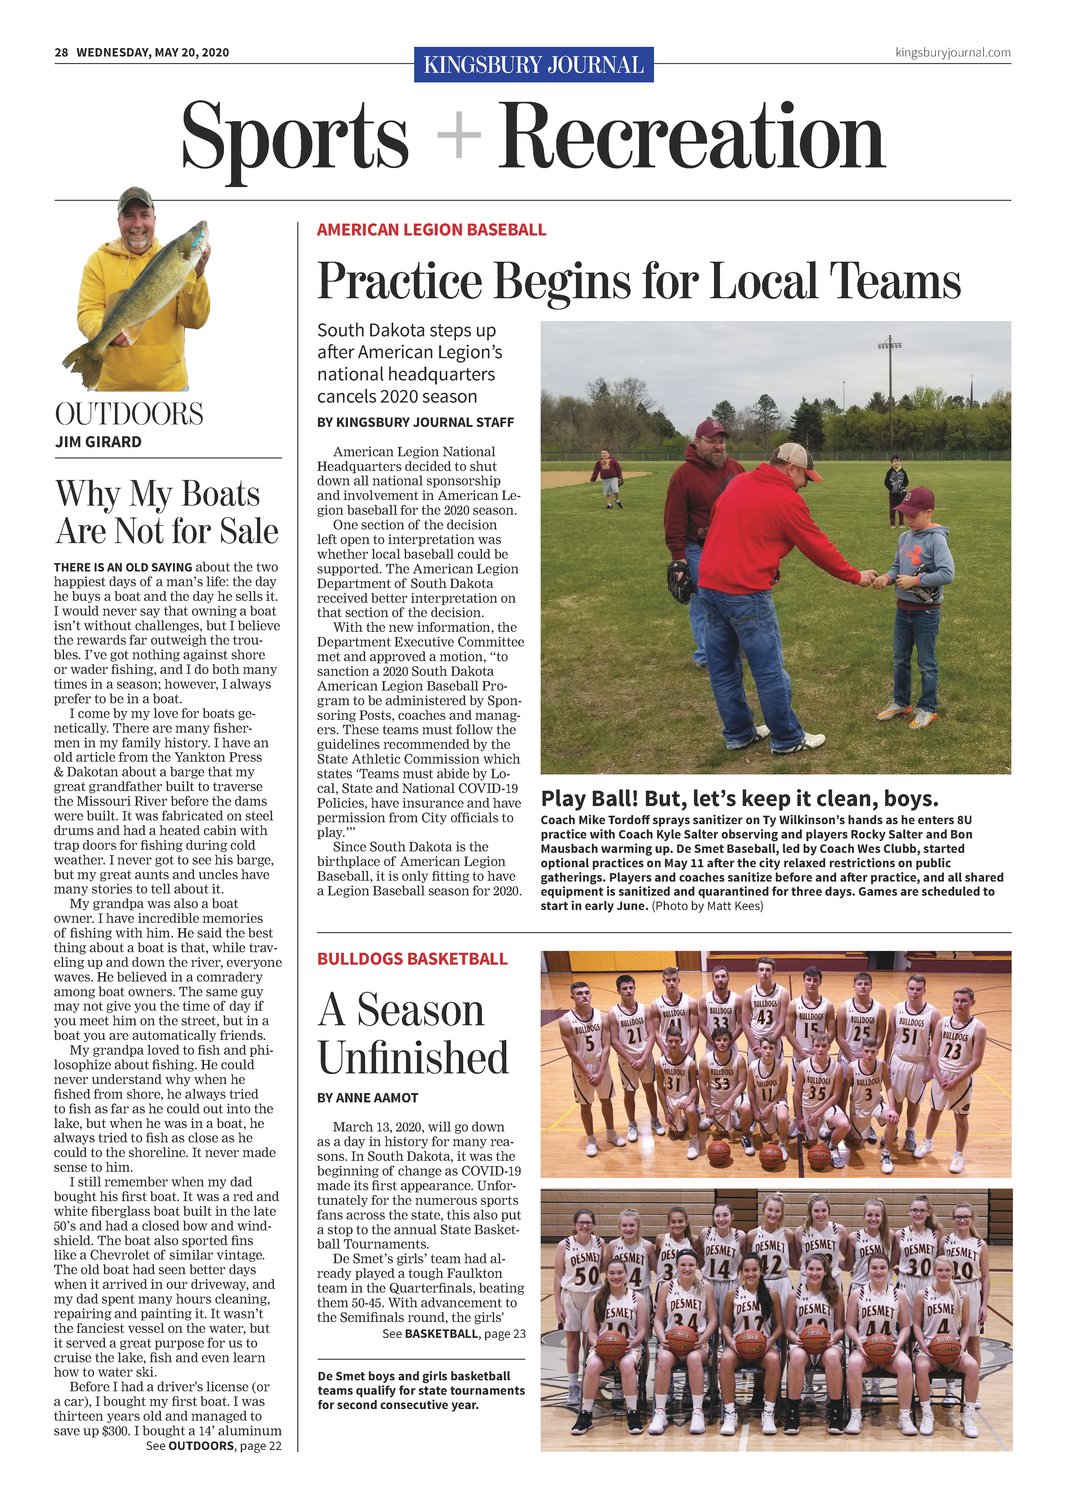 The back page features sports and recreation.